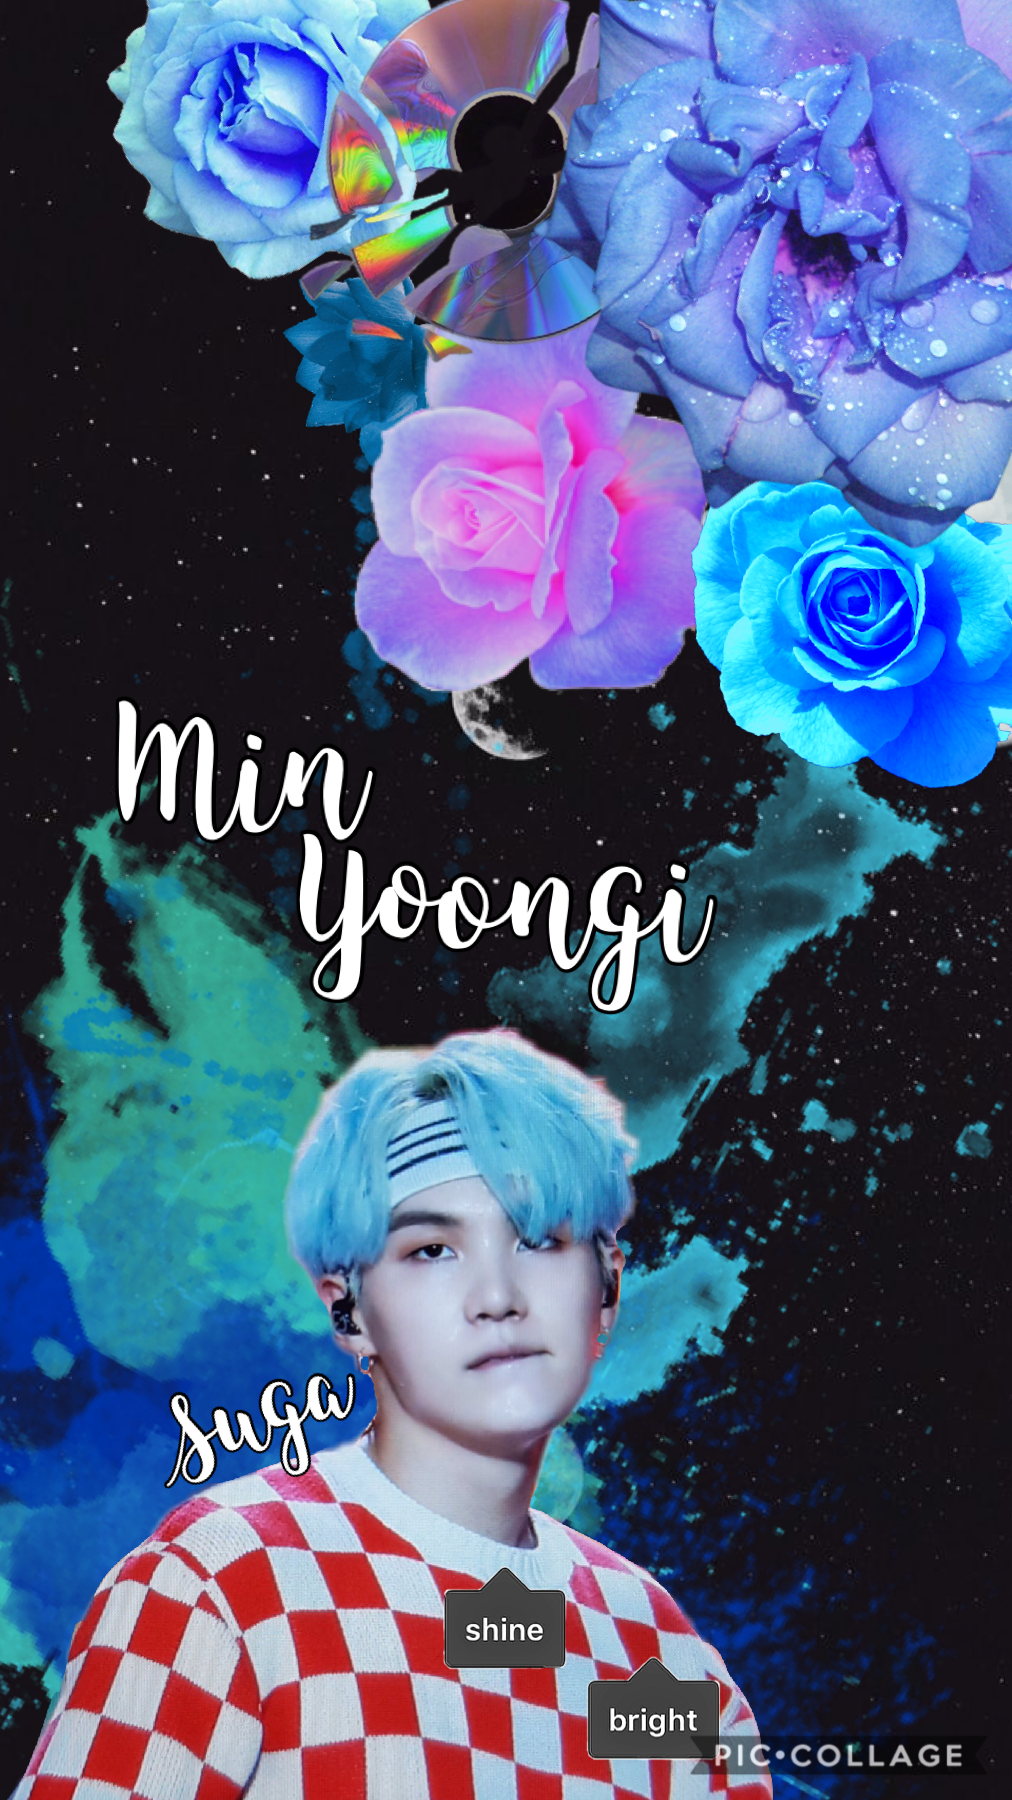 💙Yoongi(tap)💙

hey 👋 guess what? i’m back b*tches and yea. that’s for all of the supportive comments, really, it means a lot. as of right now i use they/them pronouns and identity as pan, though i’m not sure due to internal homophobia. 🌈 stay happy, you m